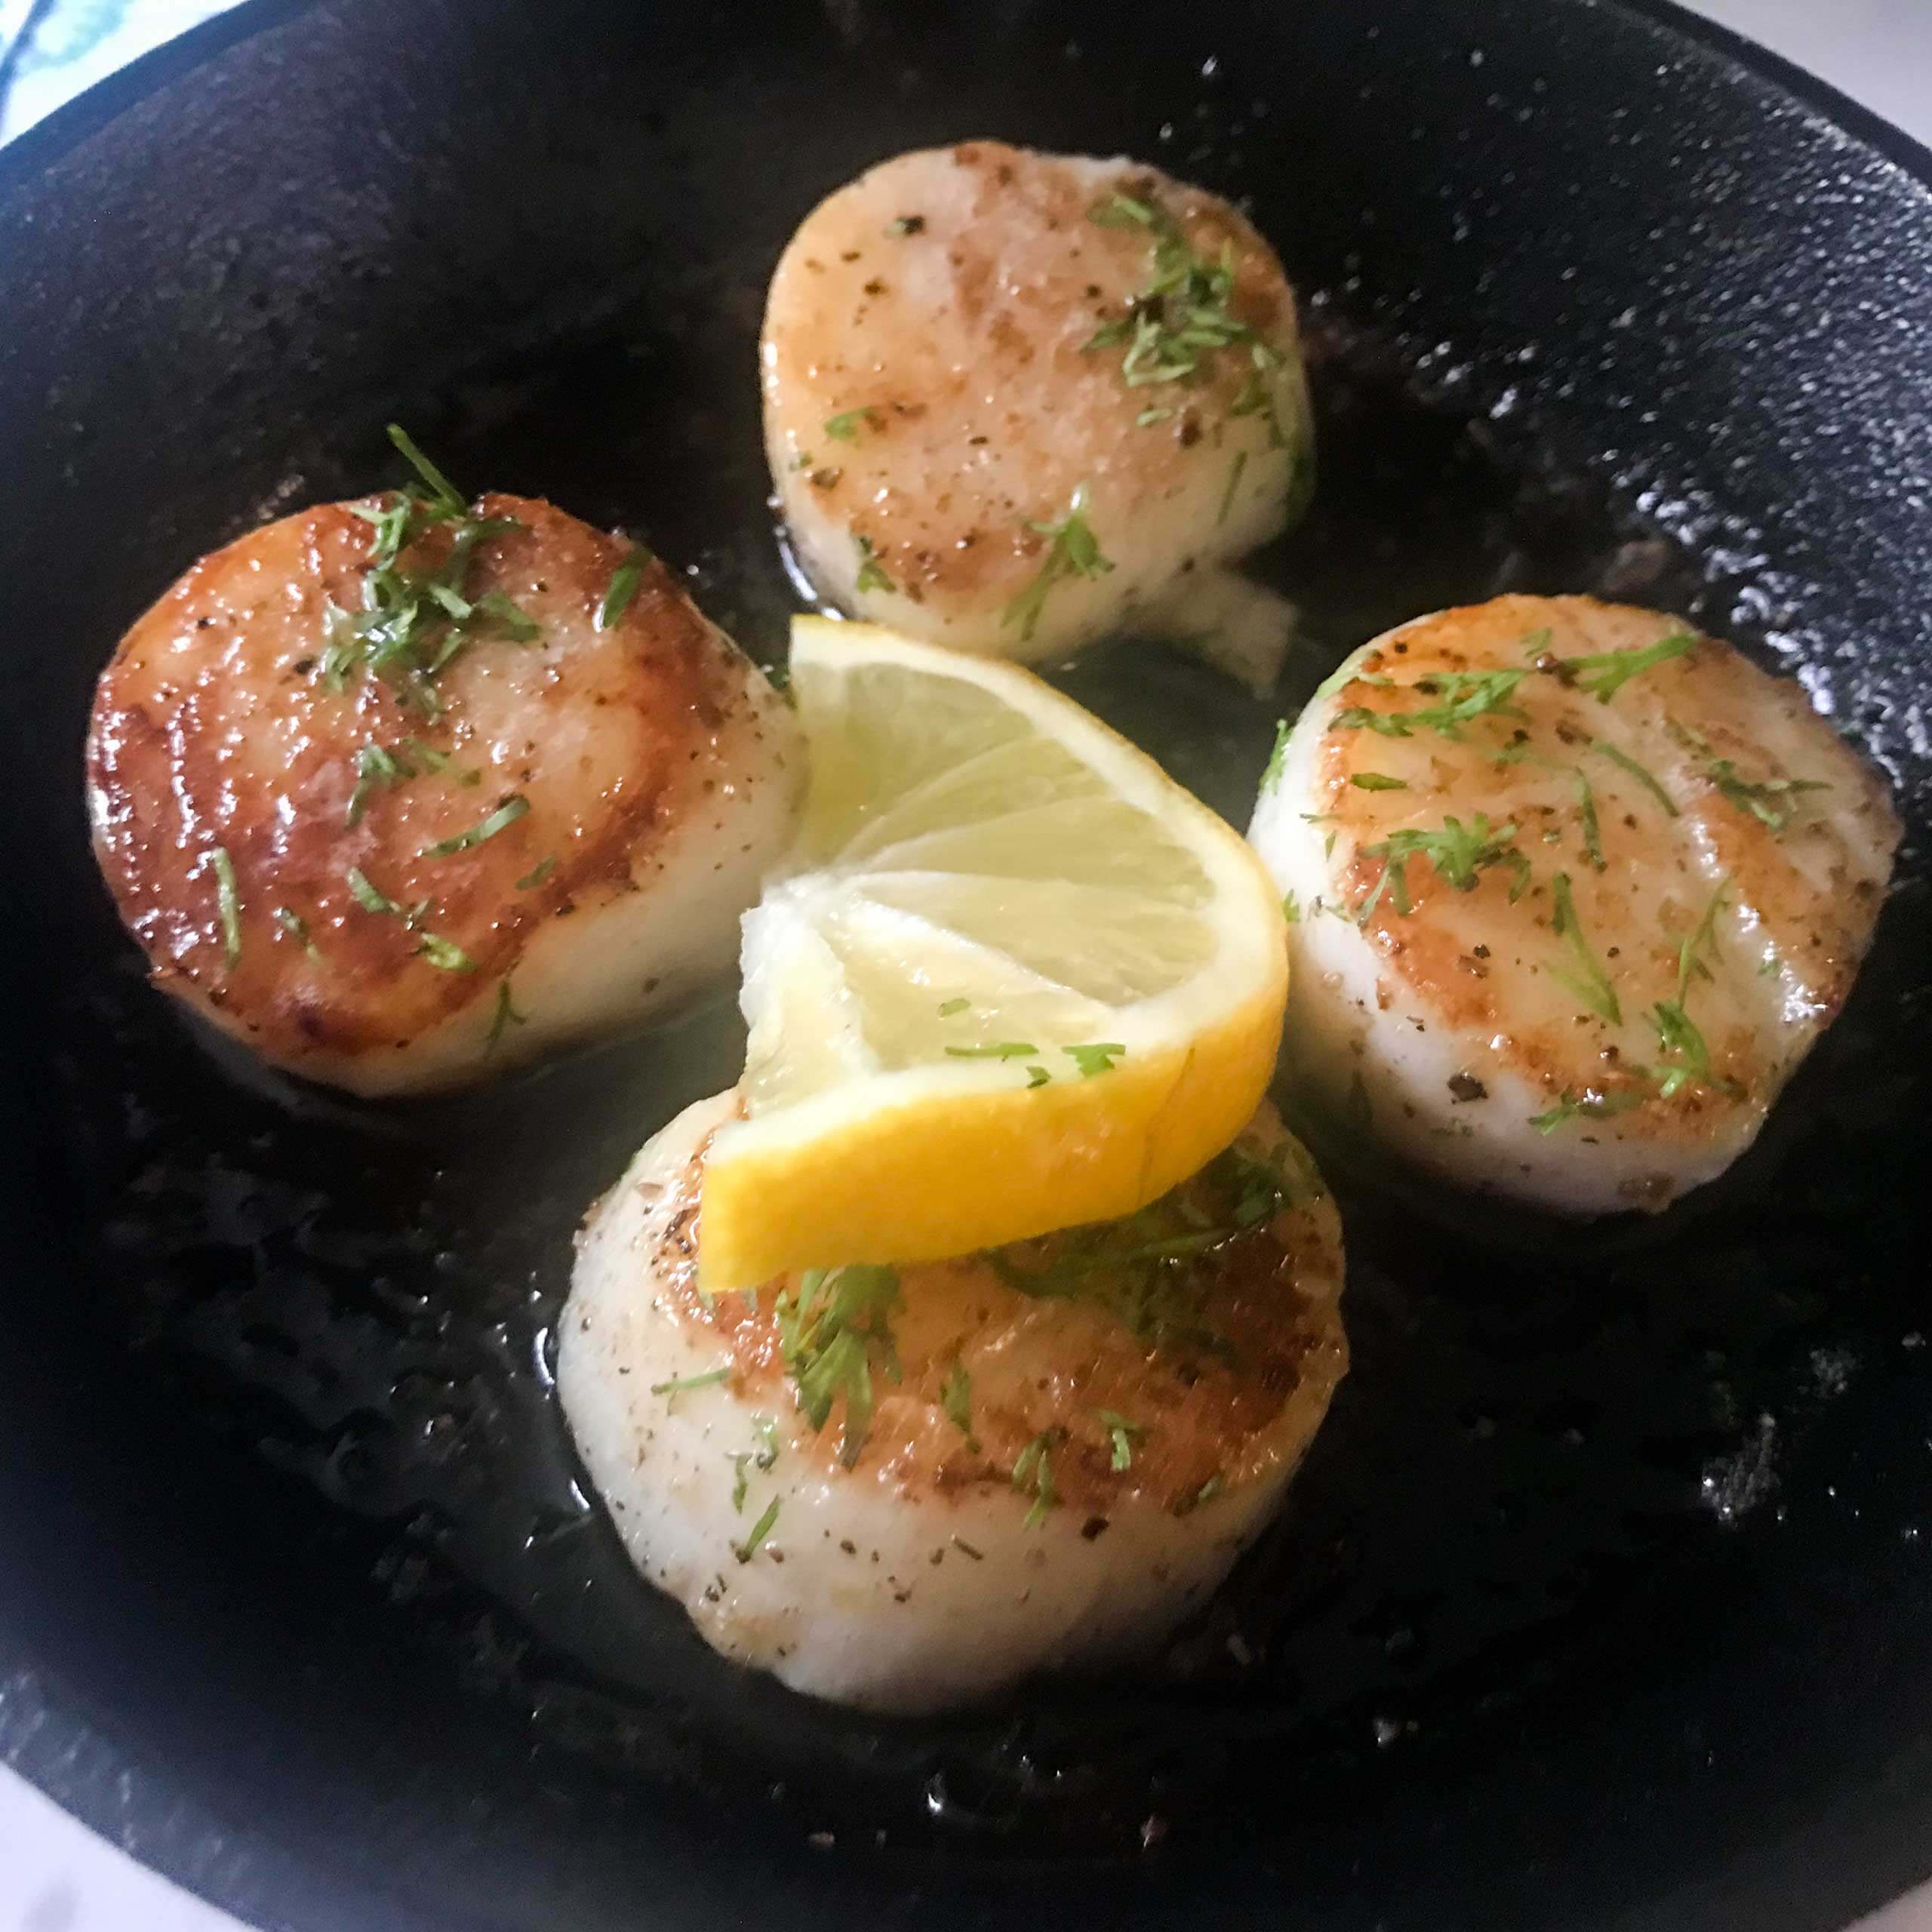 cooked scallops with dill and lemon slices.